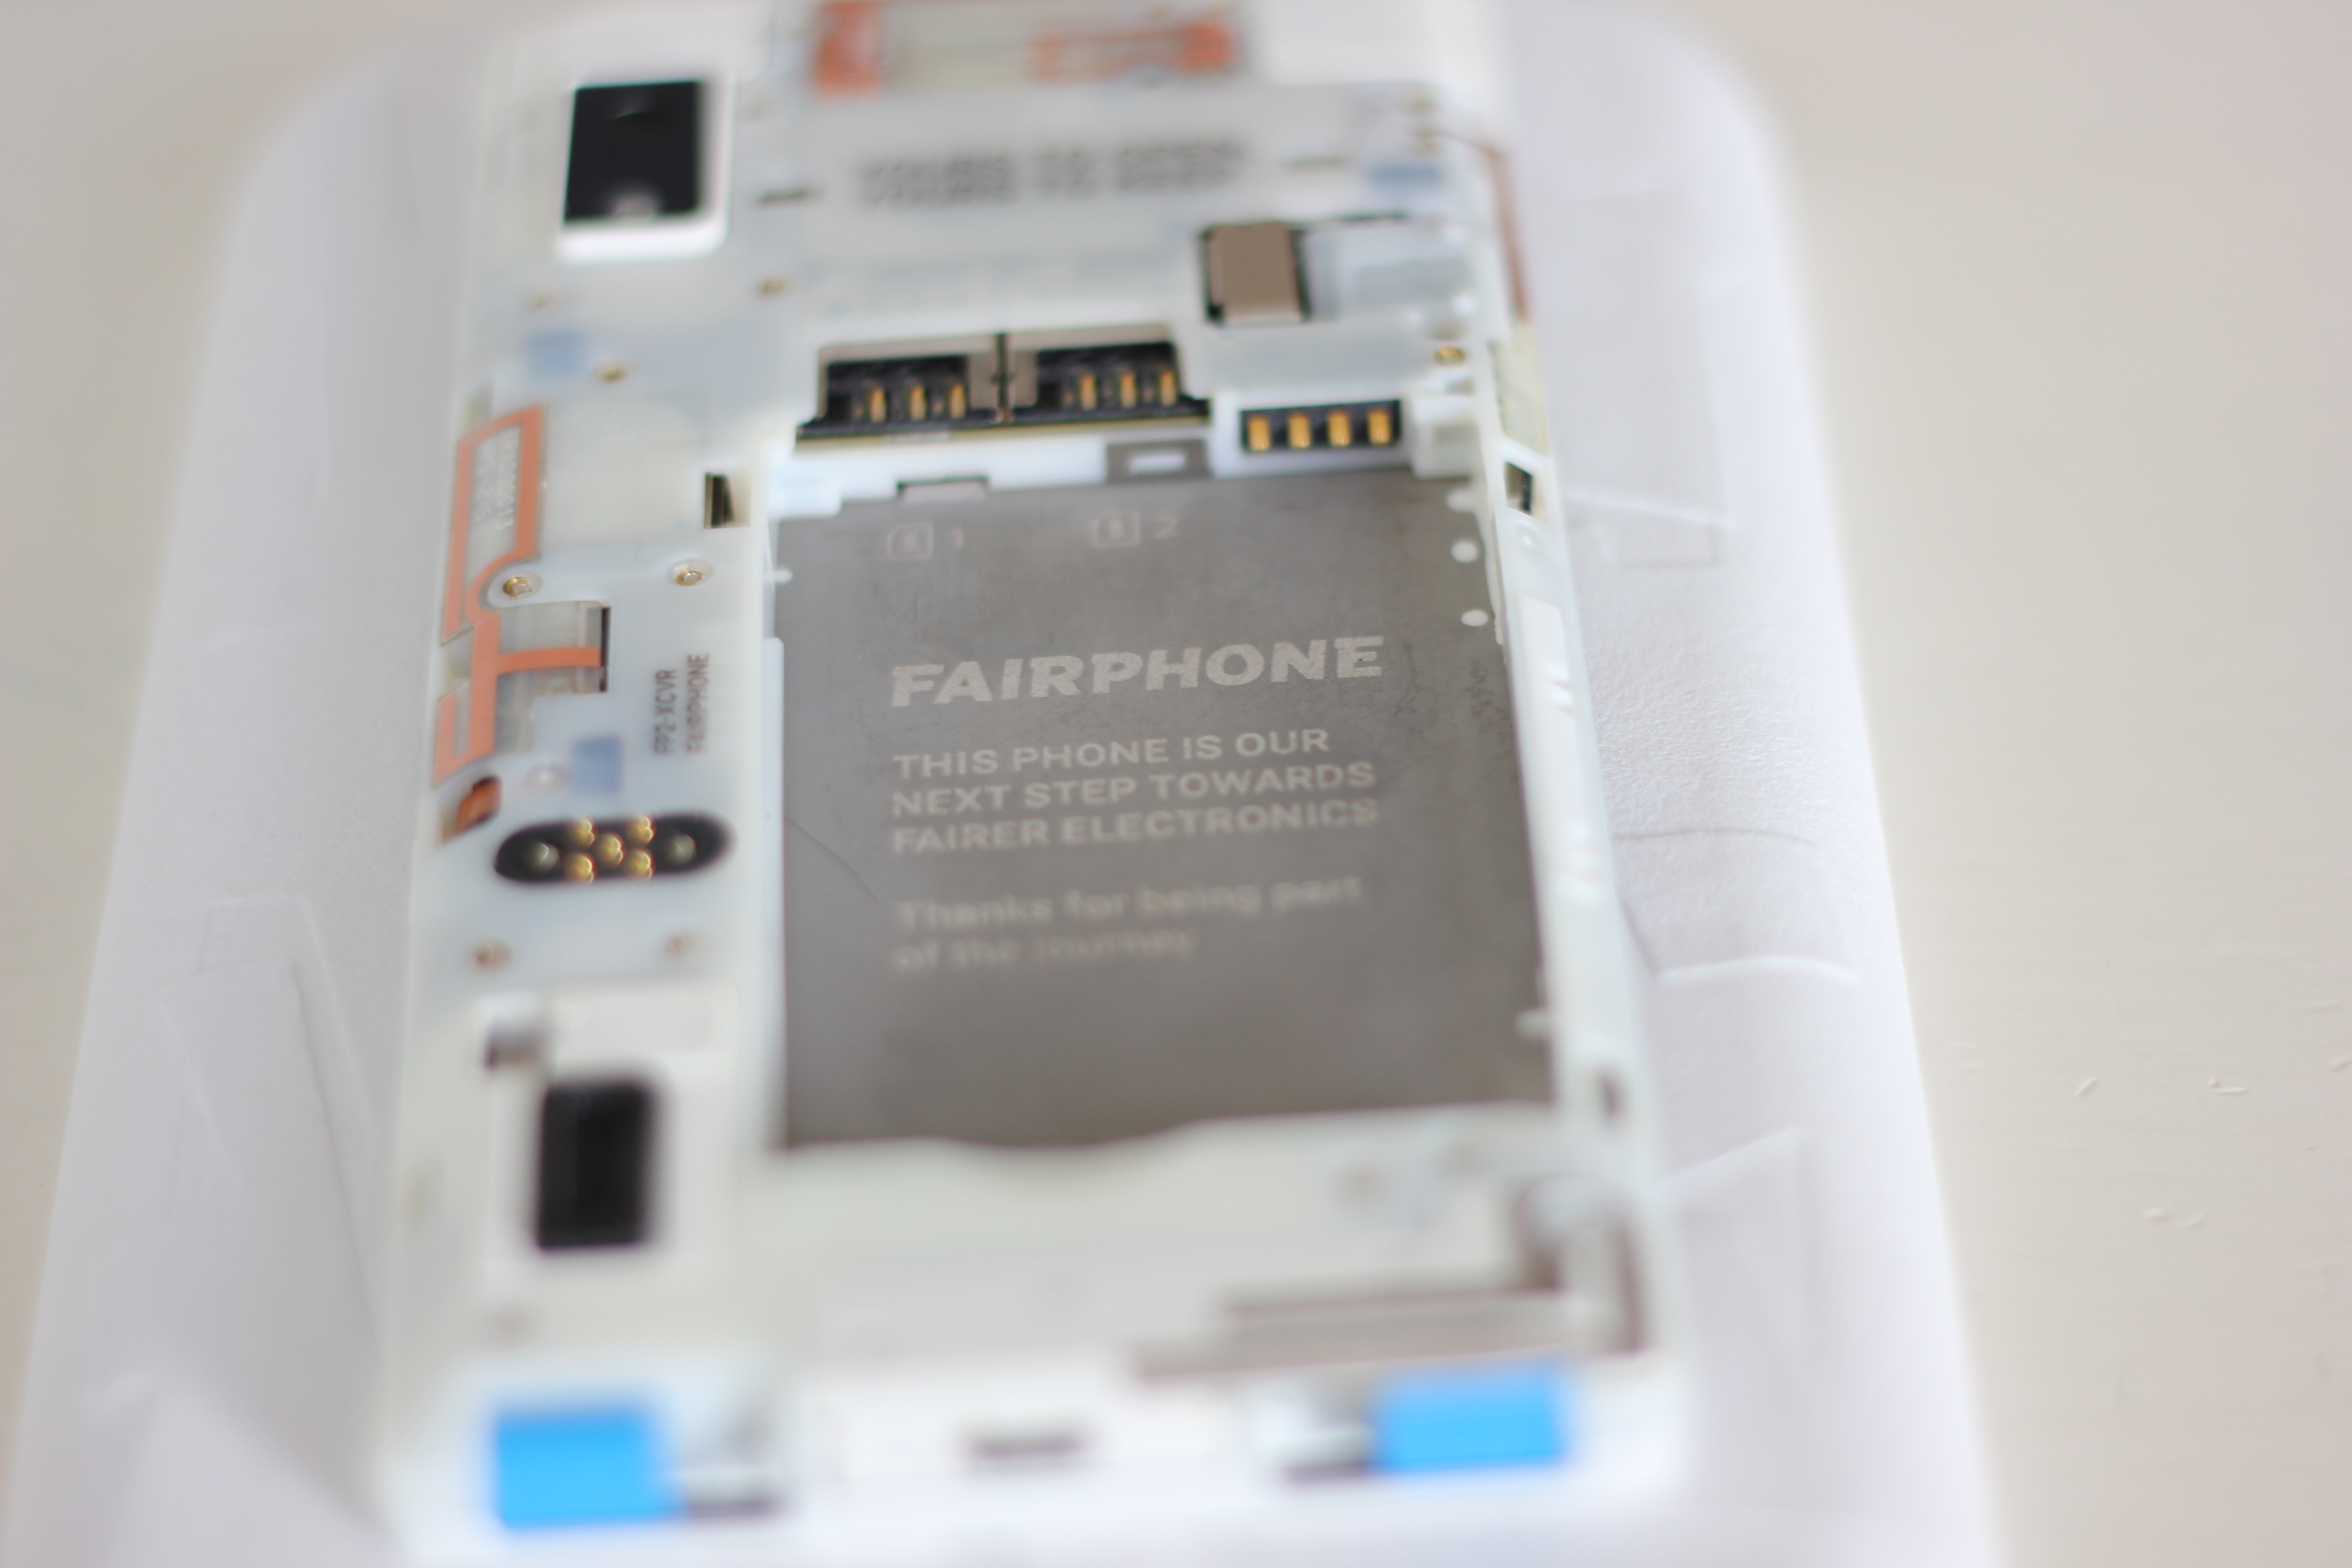 Fairphone soul stores review